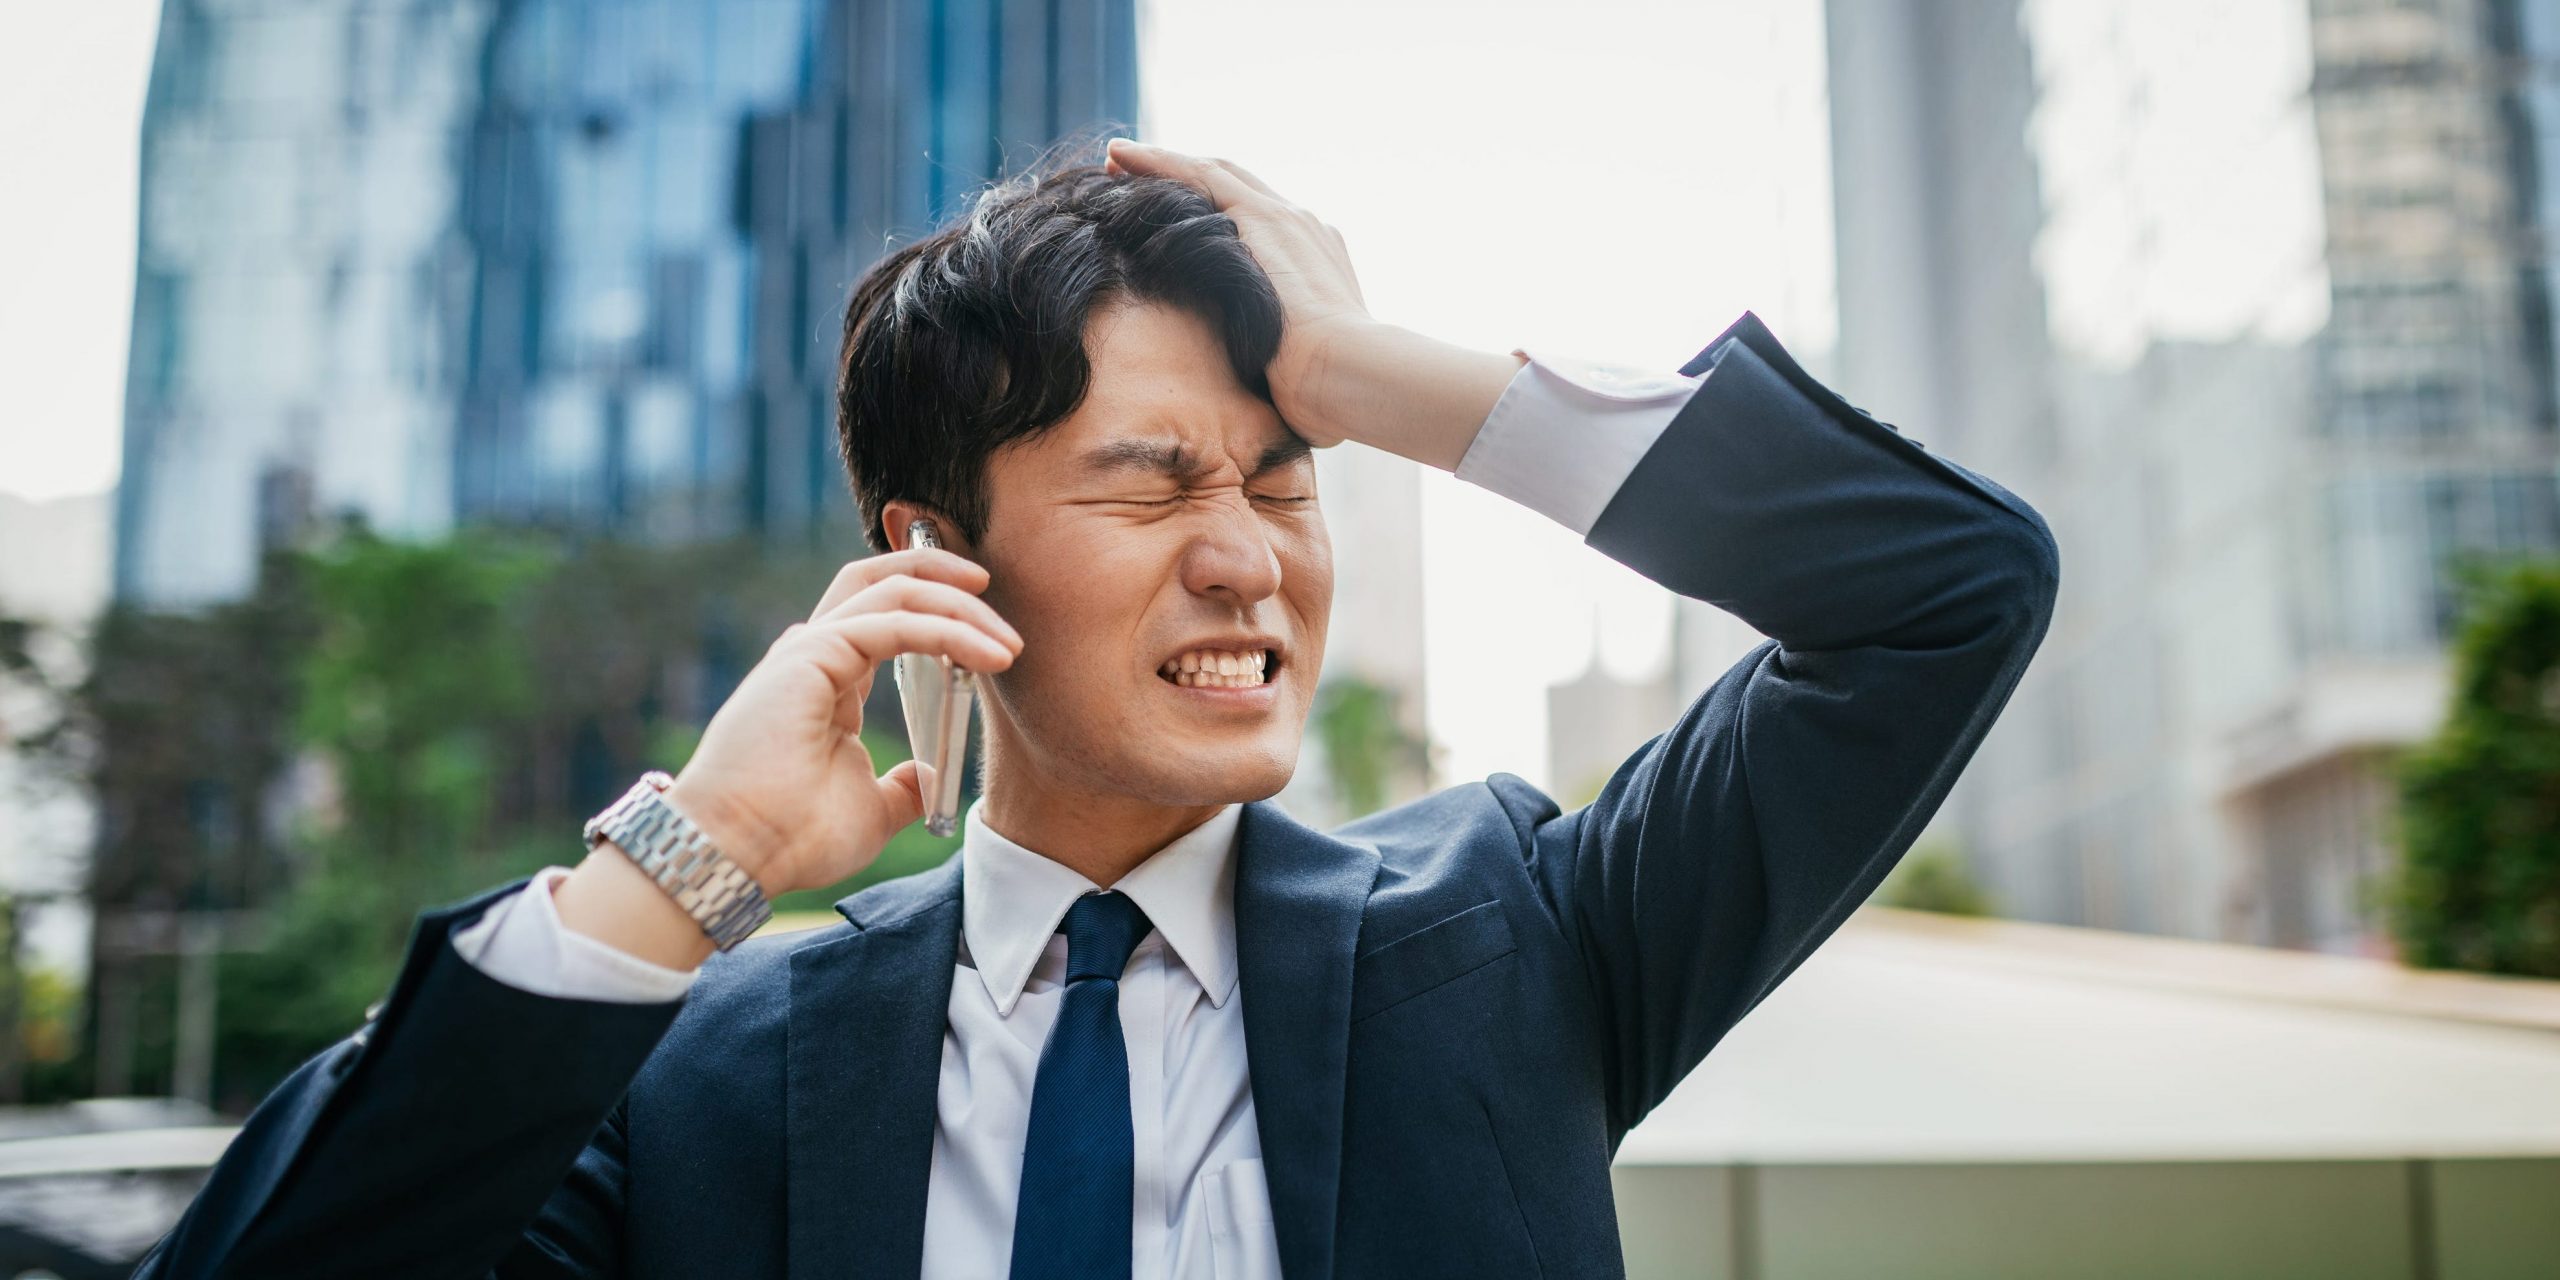 Business man in a suit, gripping his head while on the phone outside.